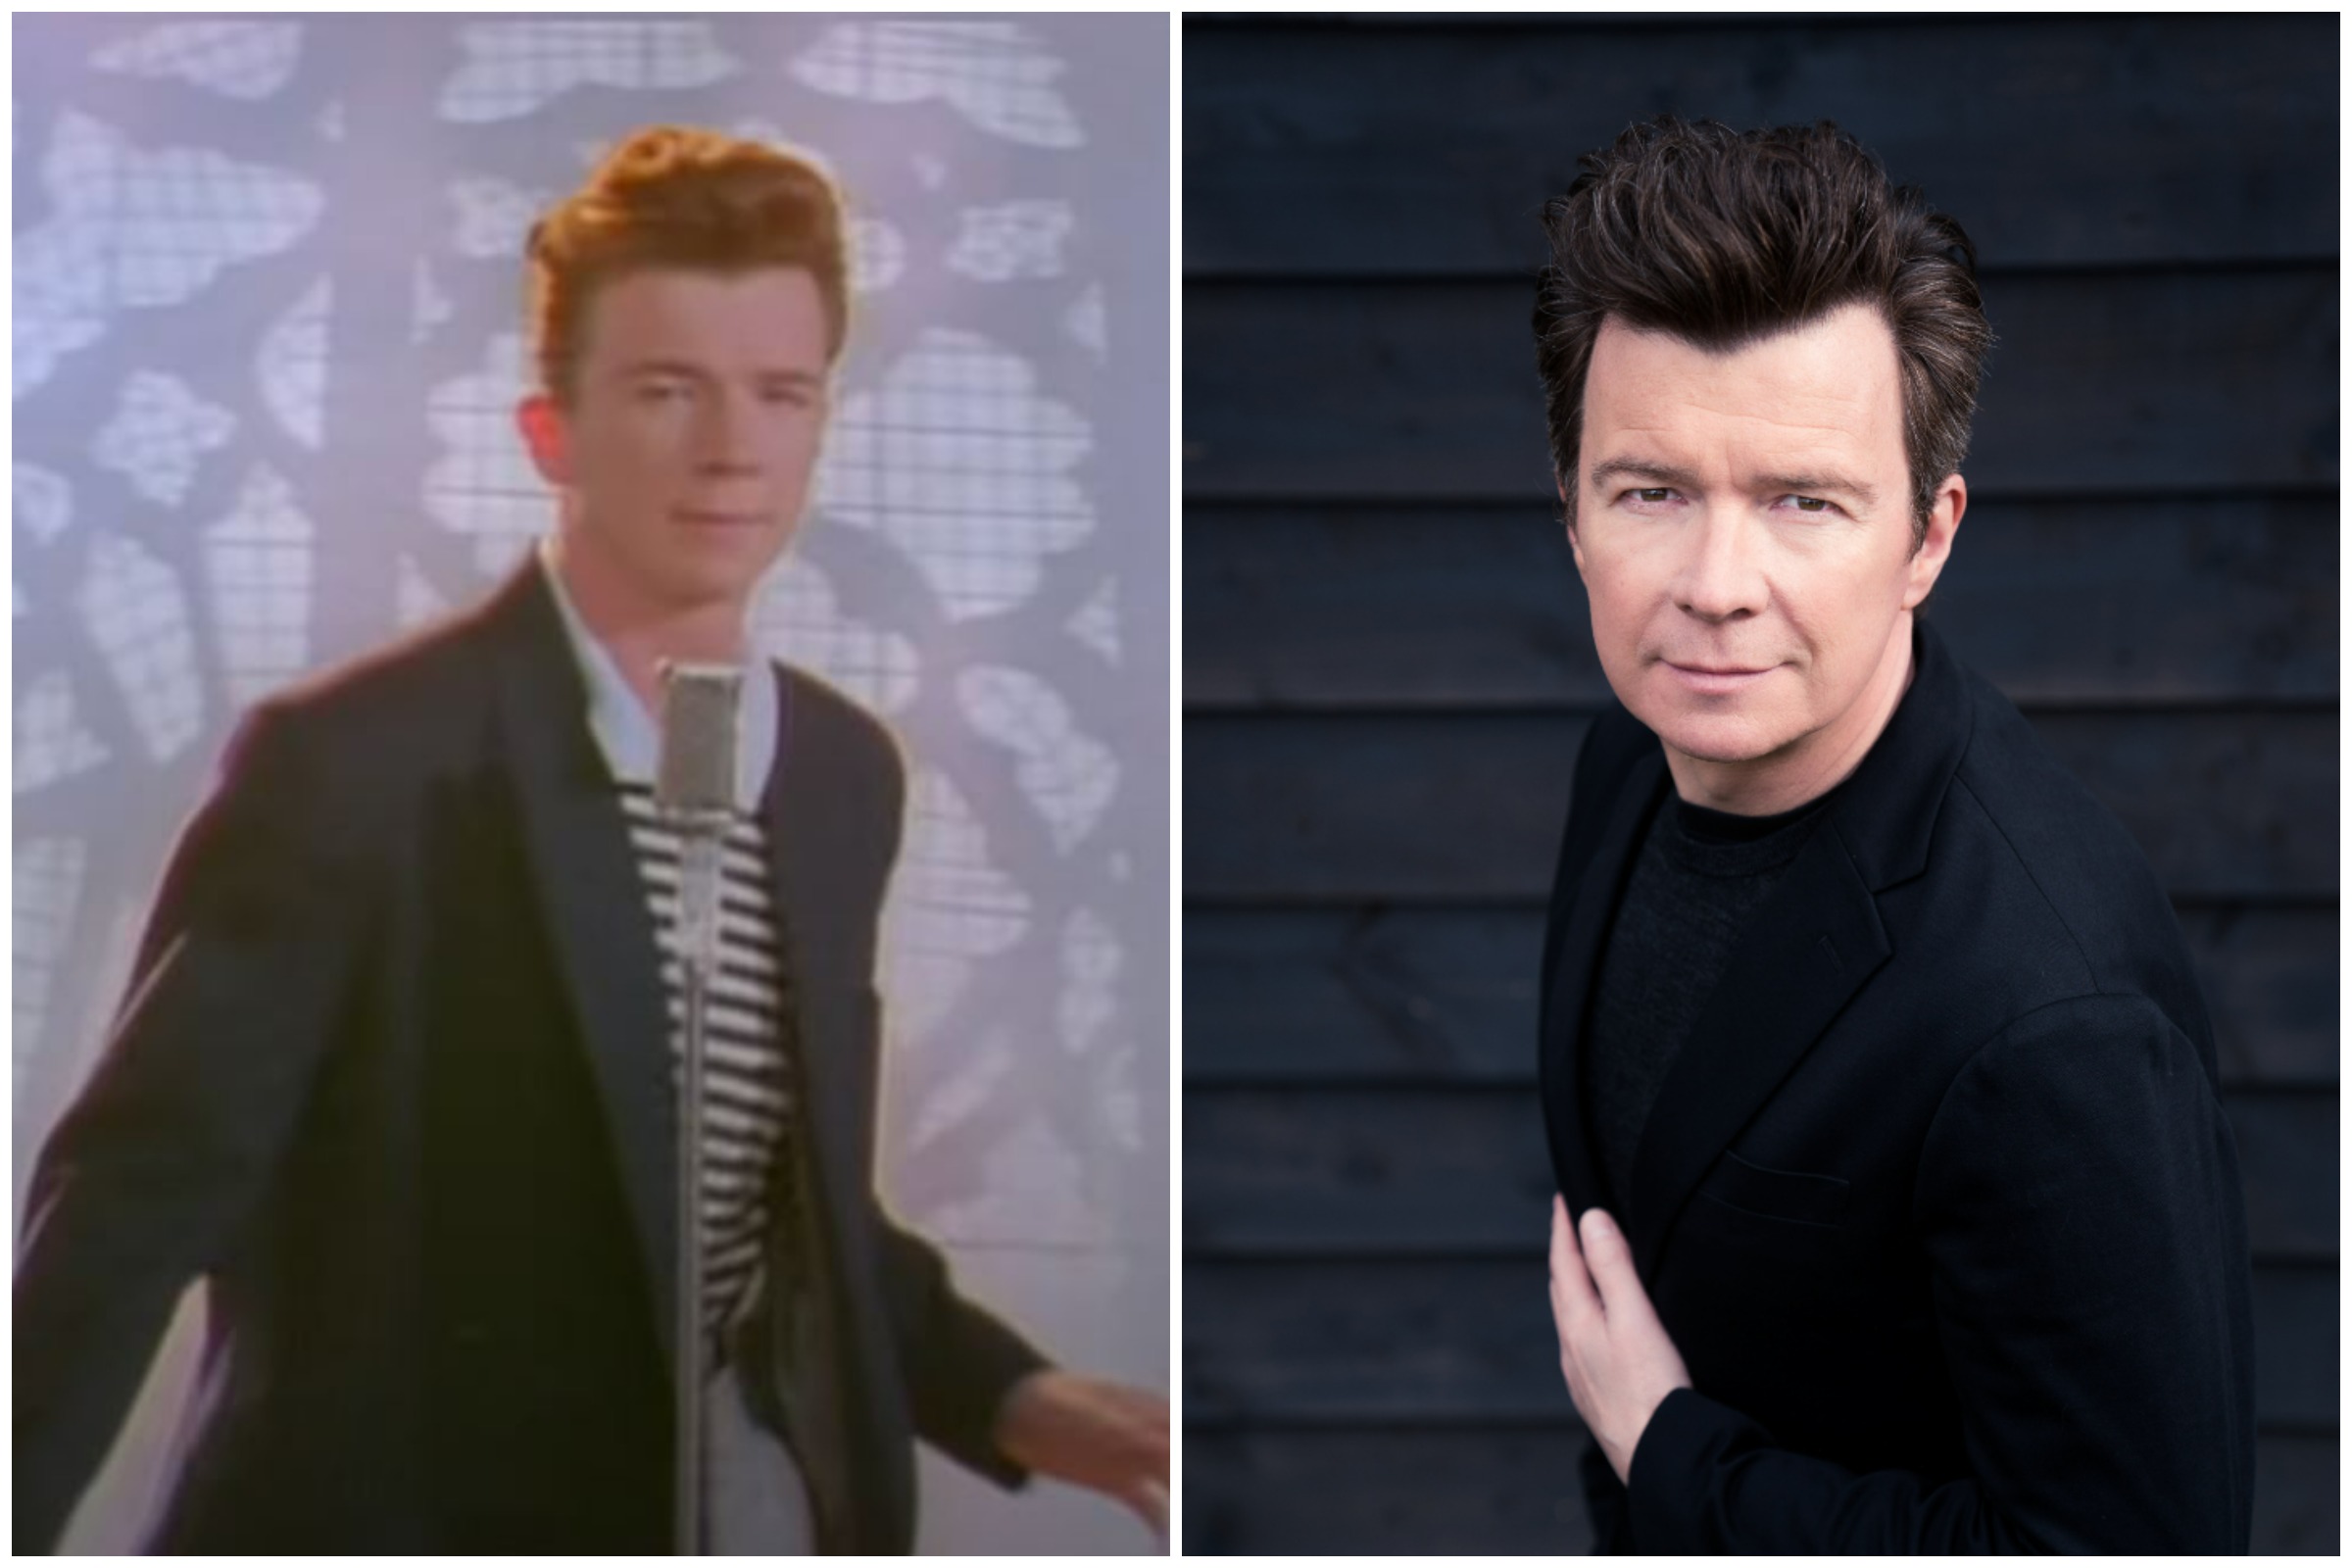 Rick Astley Reacts to Me Reacting to Rick Astley Reacting to my